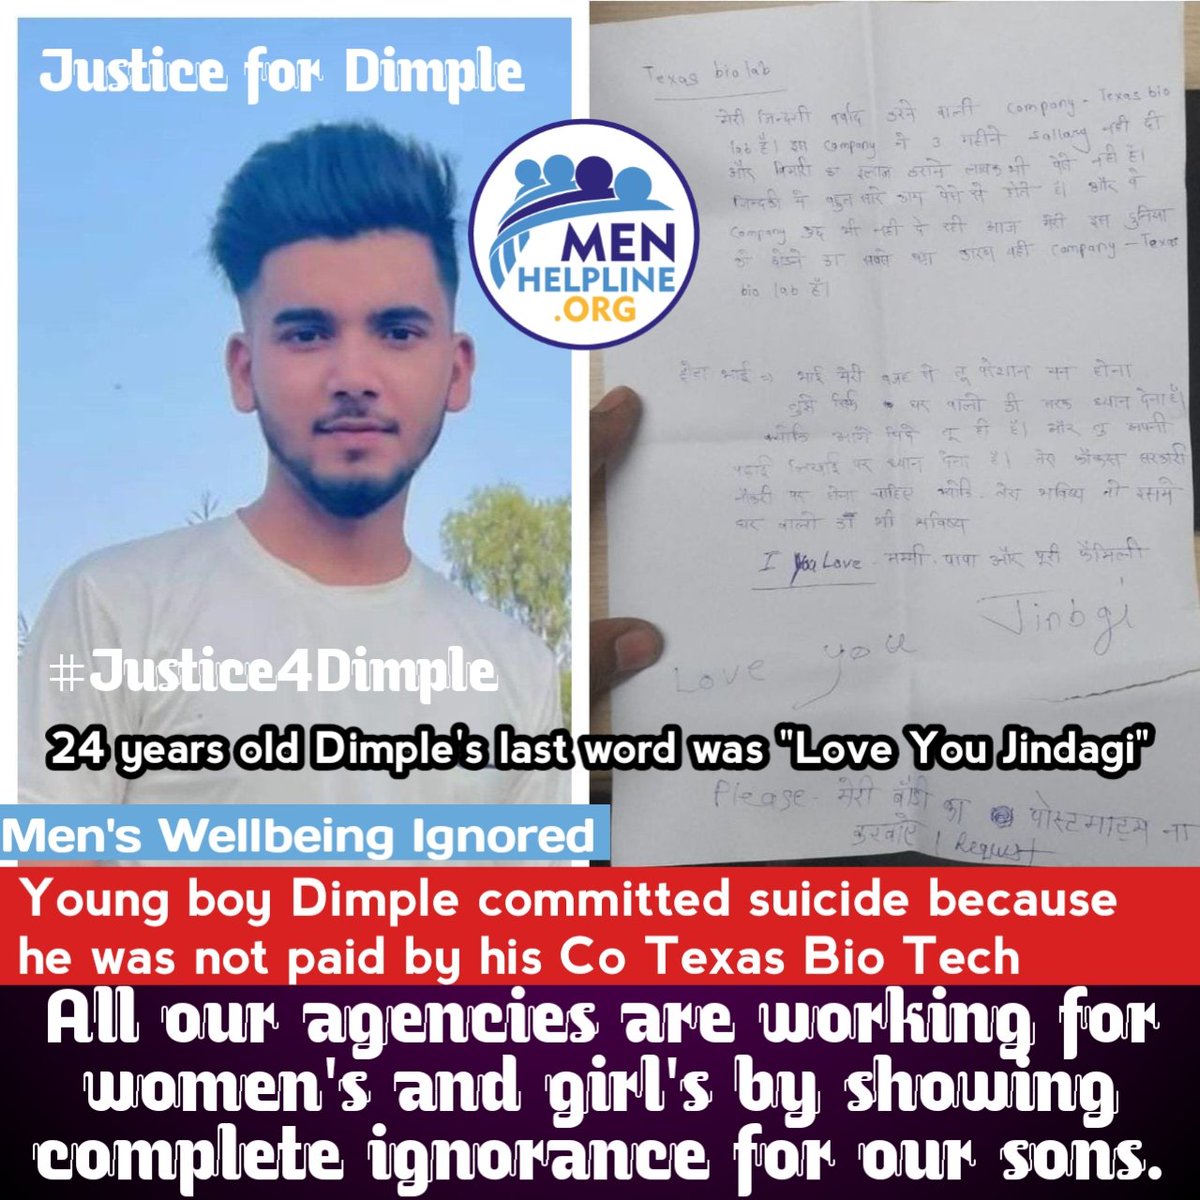 Due to the complete ignorance of male well-being, India has lost a talent. He held onto hope for life until his last breath. It's unfortunate that our agencies only seem to focus on females and neglect the needs of Male's. #Justice4Dimple #saveoursons #saveourboys #menhelpline